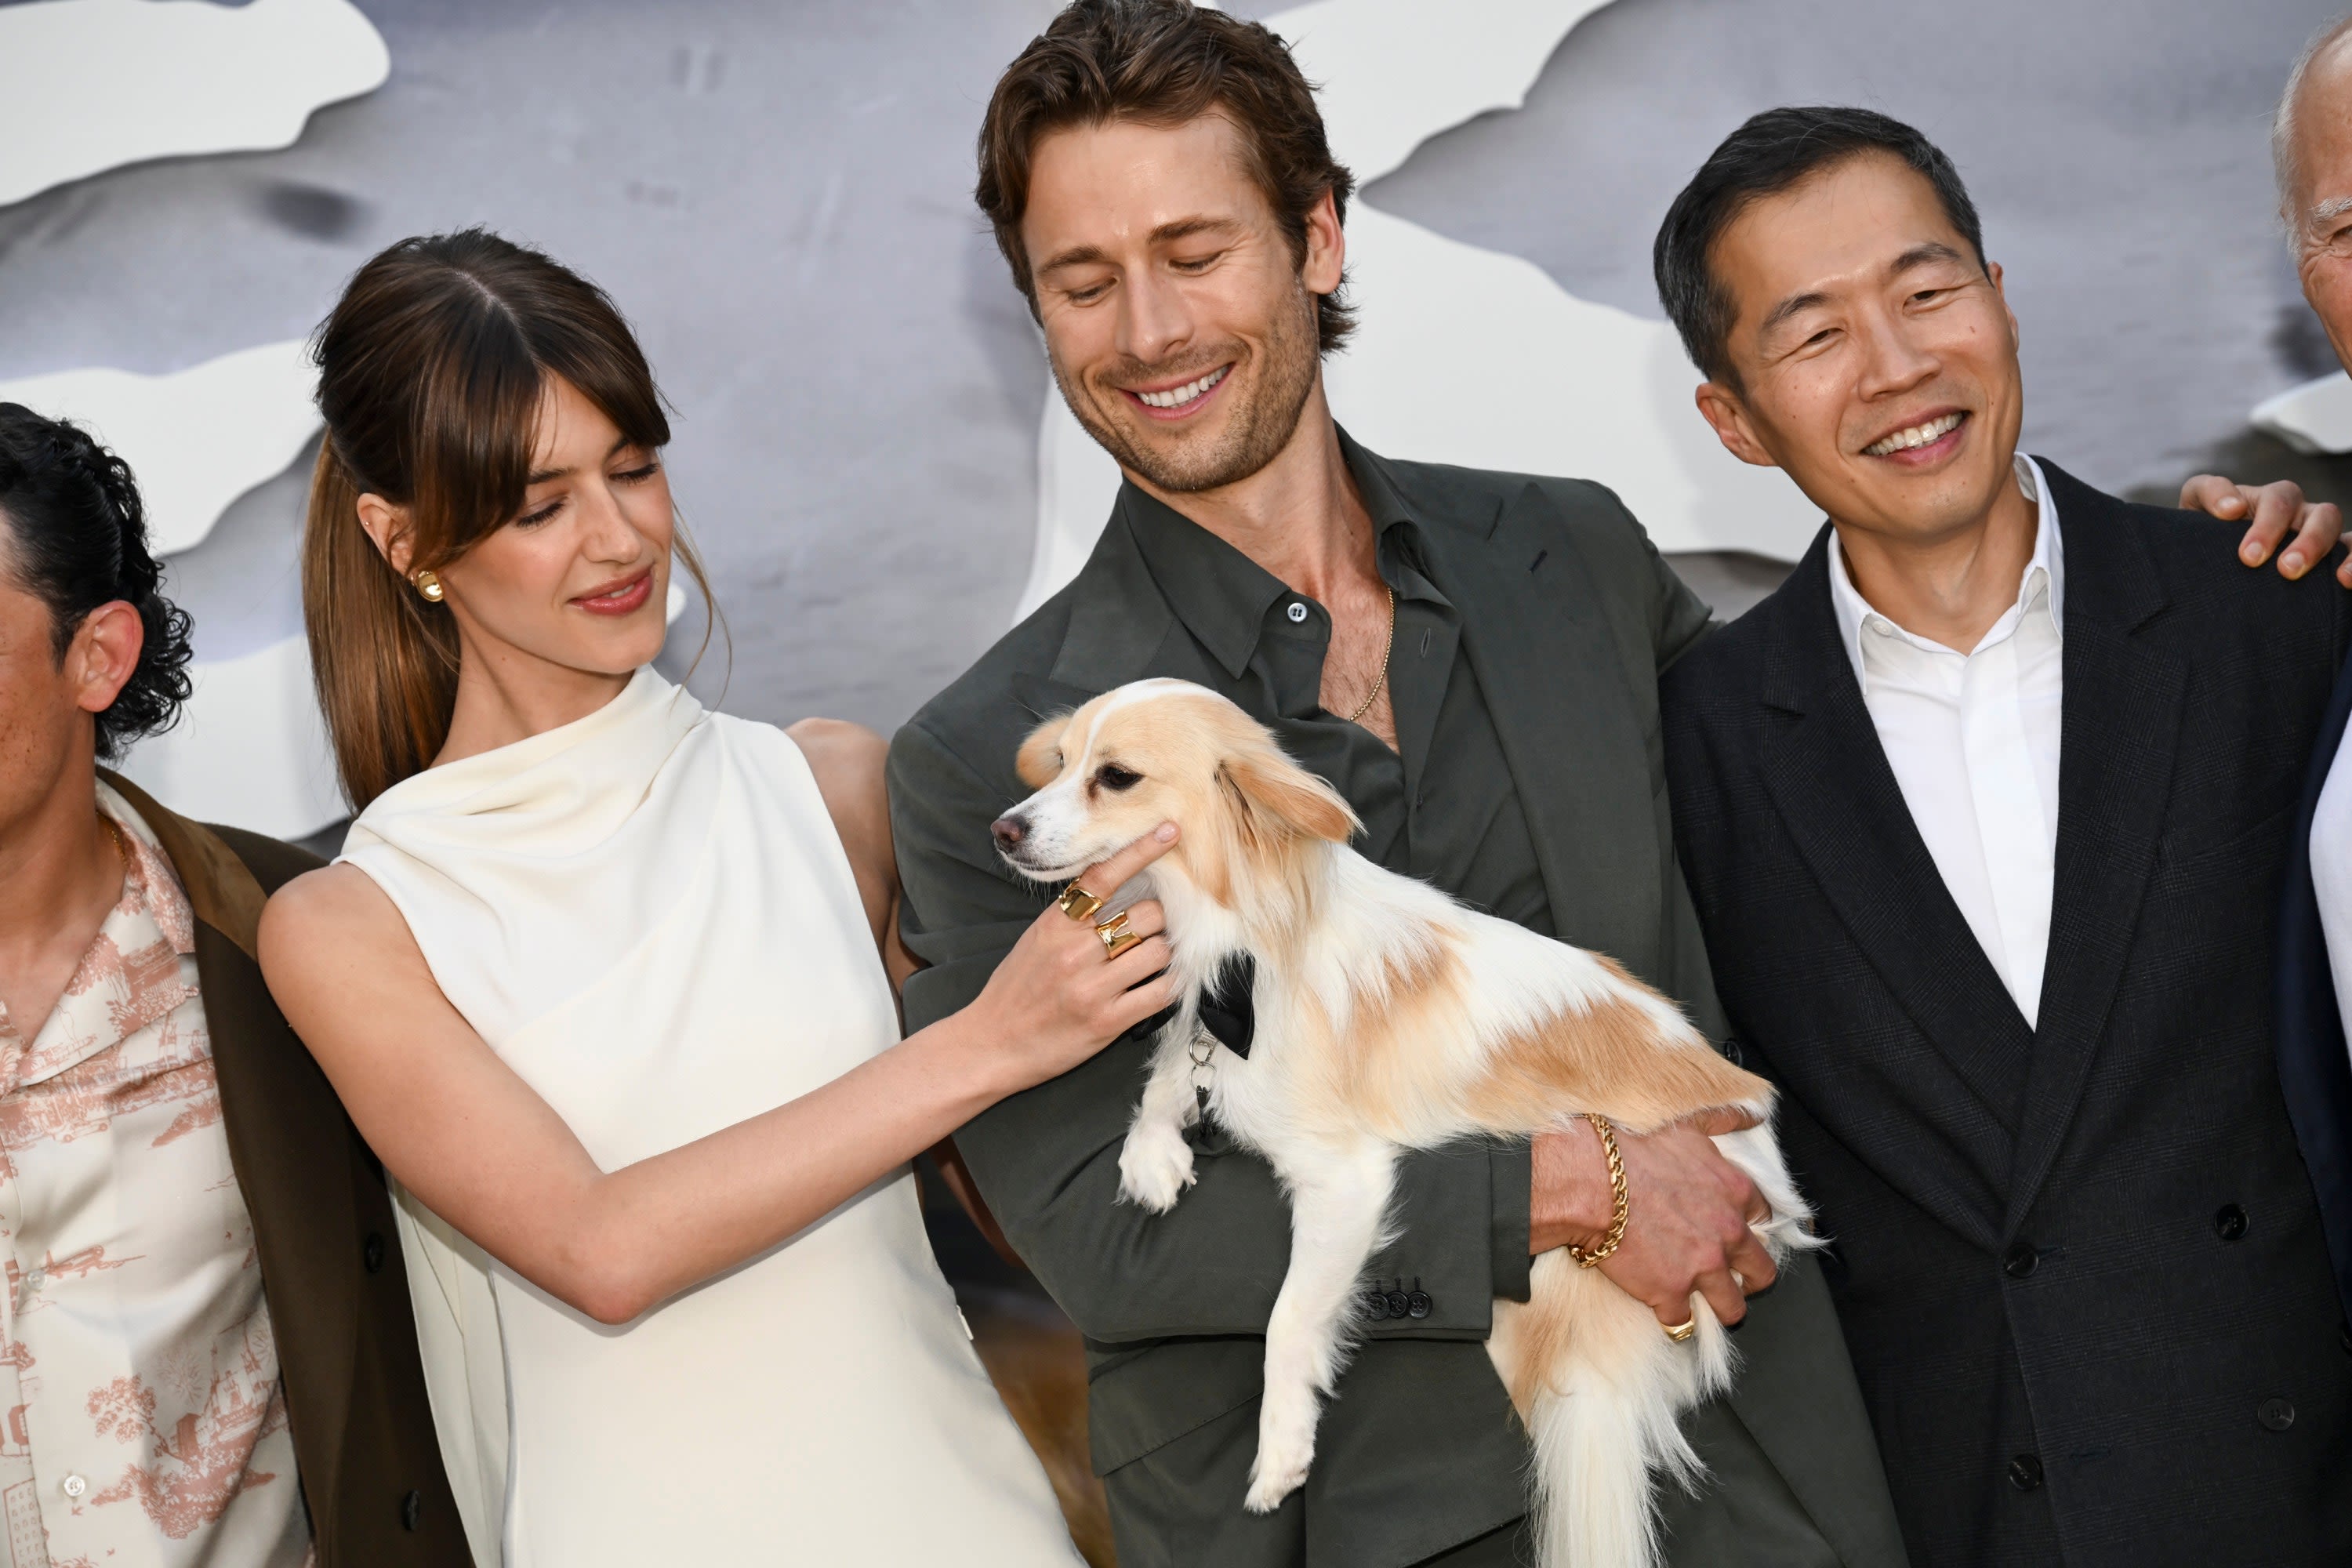 Glen Powell Opened Up About Adopting His Dog Brisket: “I Consider Him the Best Special Feature of Twisters”